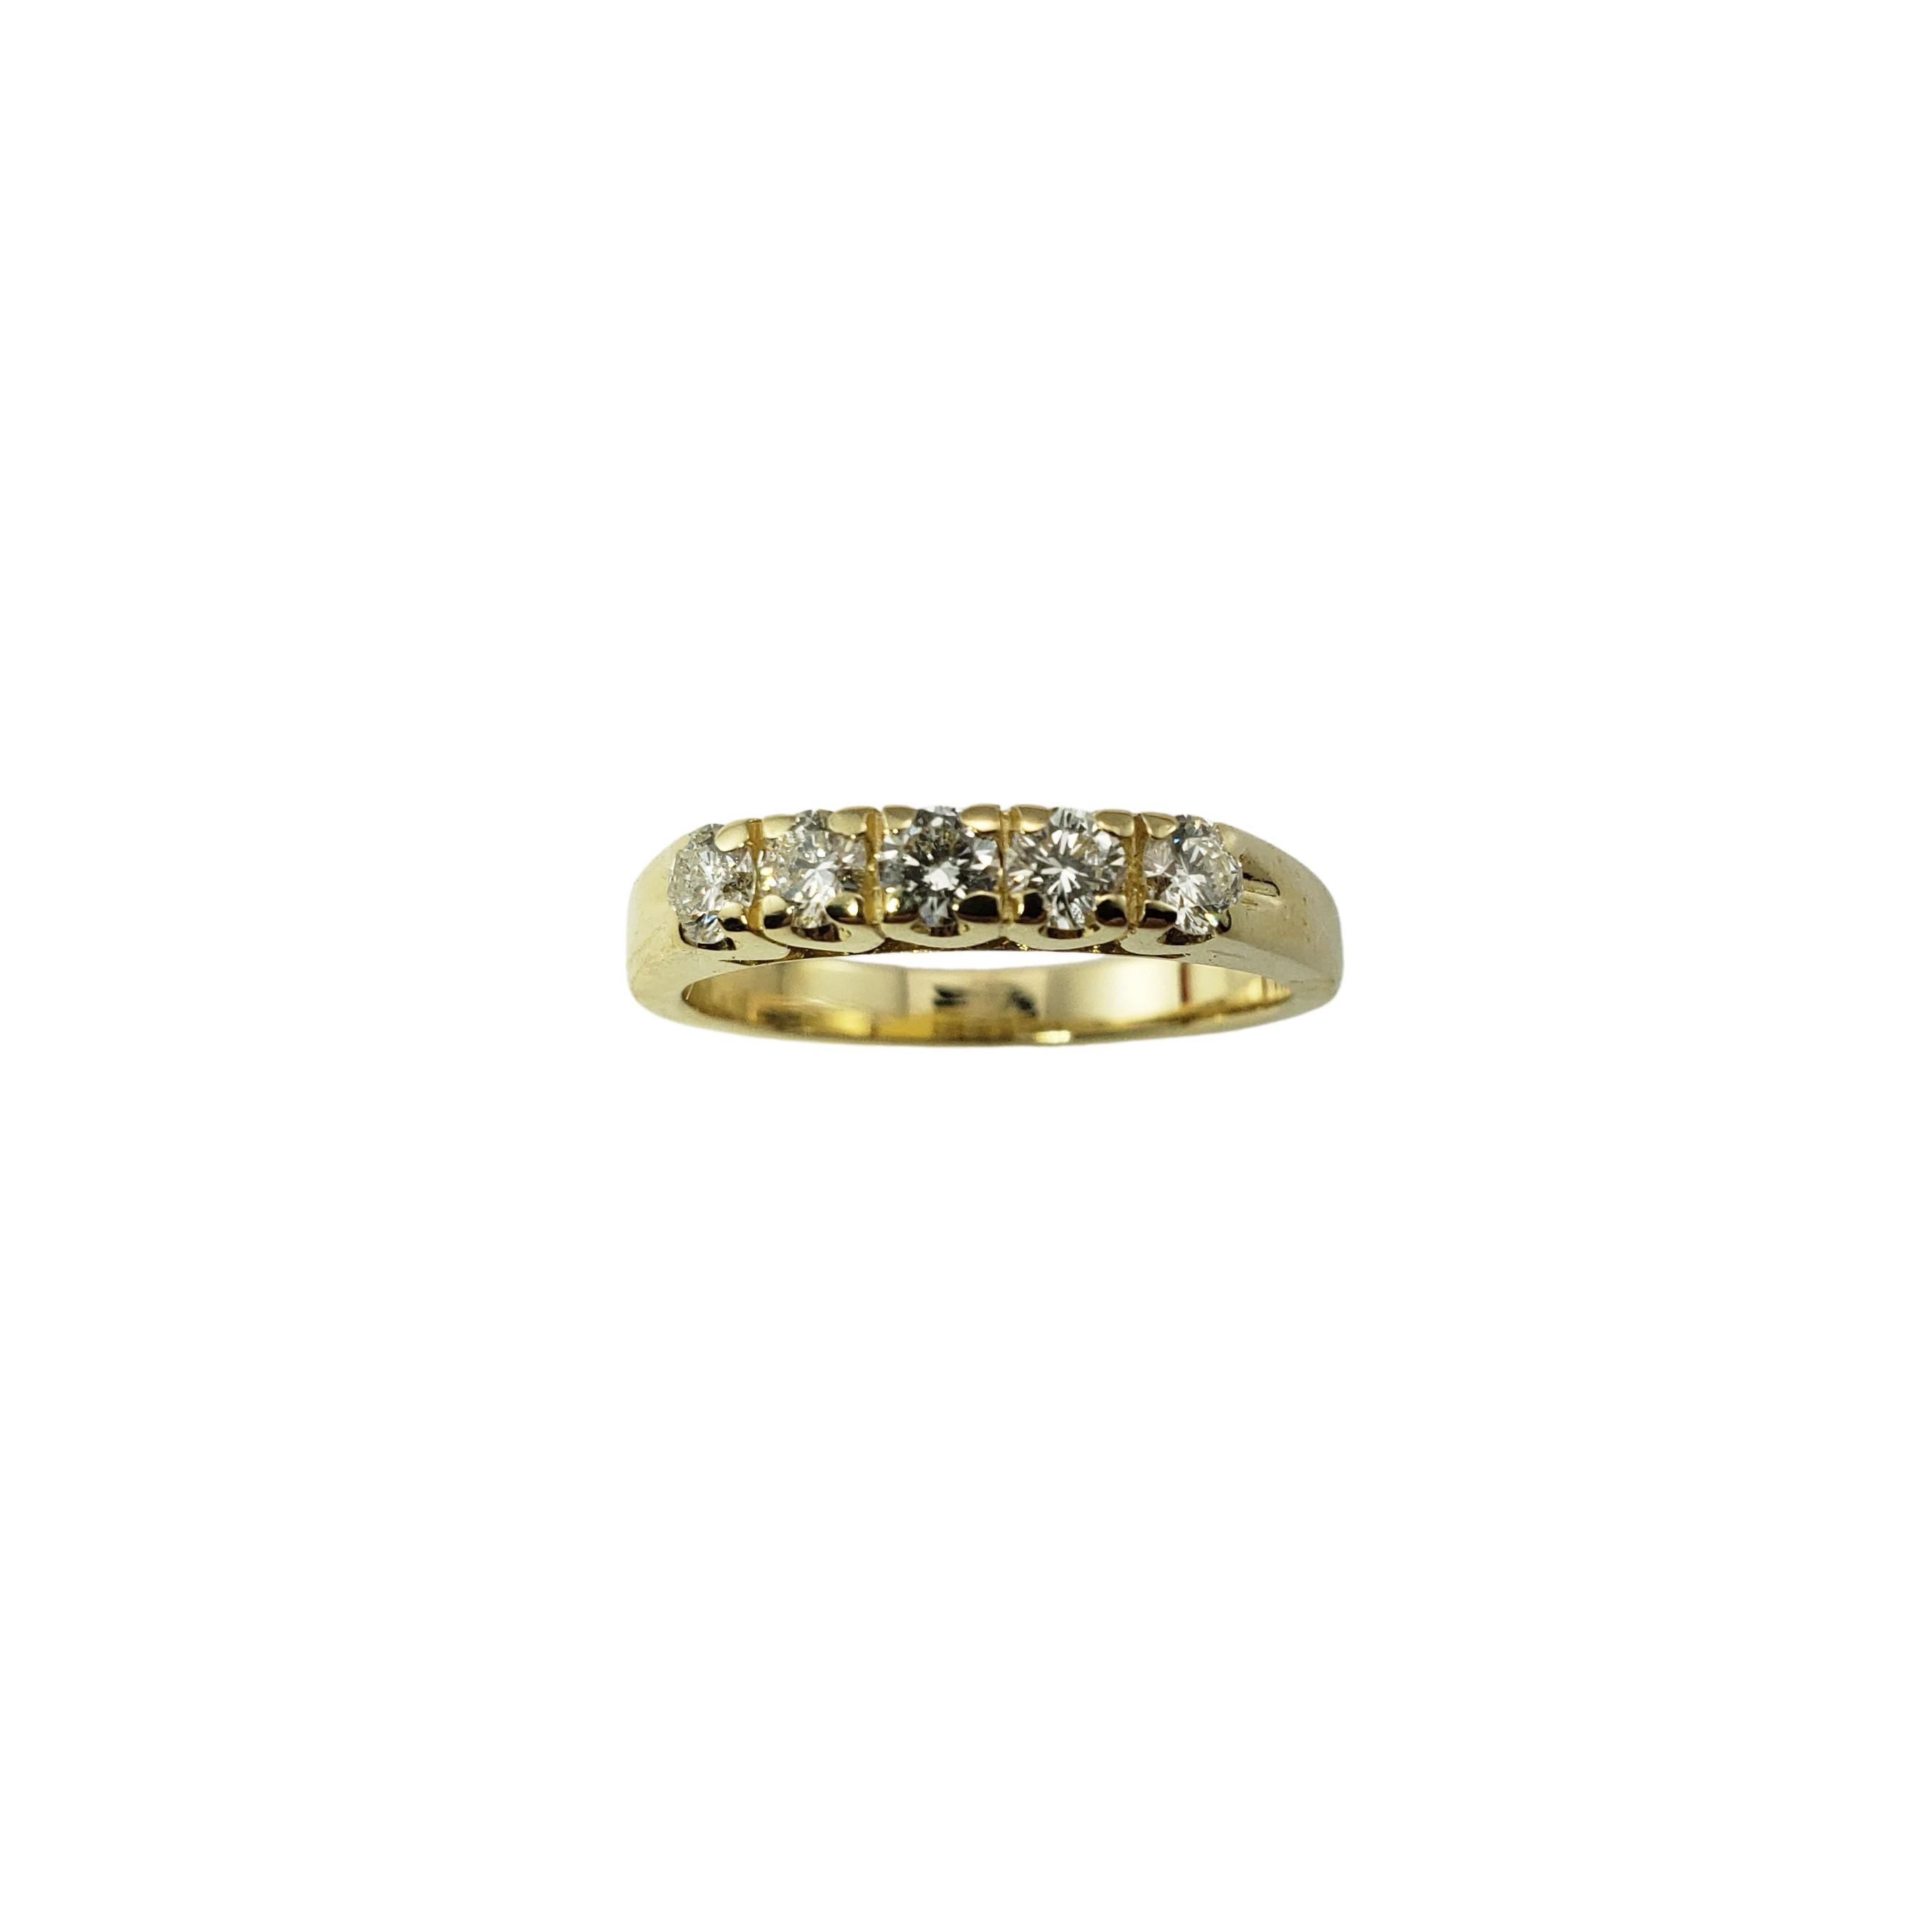 18 Karat Yellow Gold and Diamond Wedding Anniversary Band Ring Size 7-

This sparkling ring features five round brilliant cut diamonds set in classic 18K yellow gold.  Width:  3 mm.  Shank:  2.5 mm.

Approximate diamond weight:  .40 ct.

Diamond